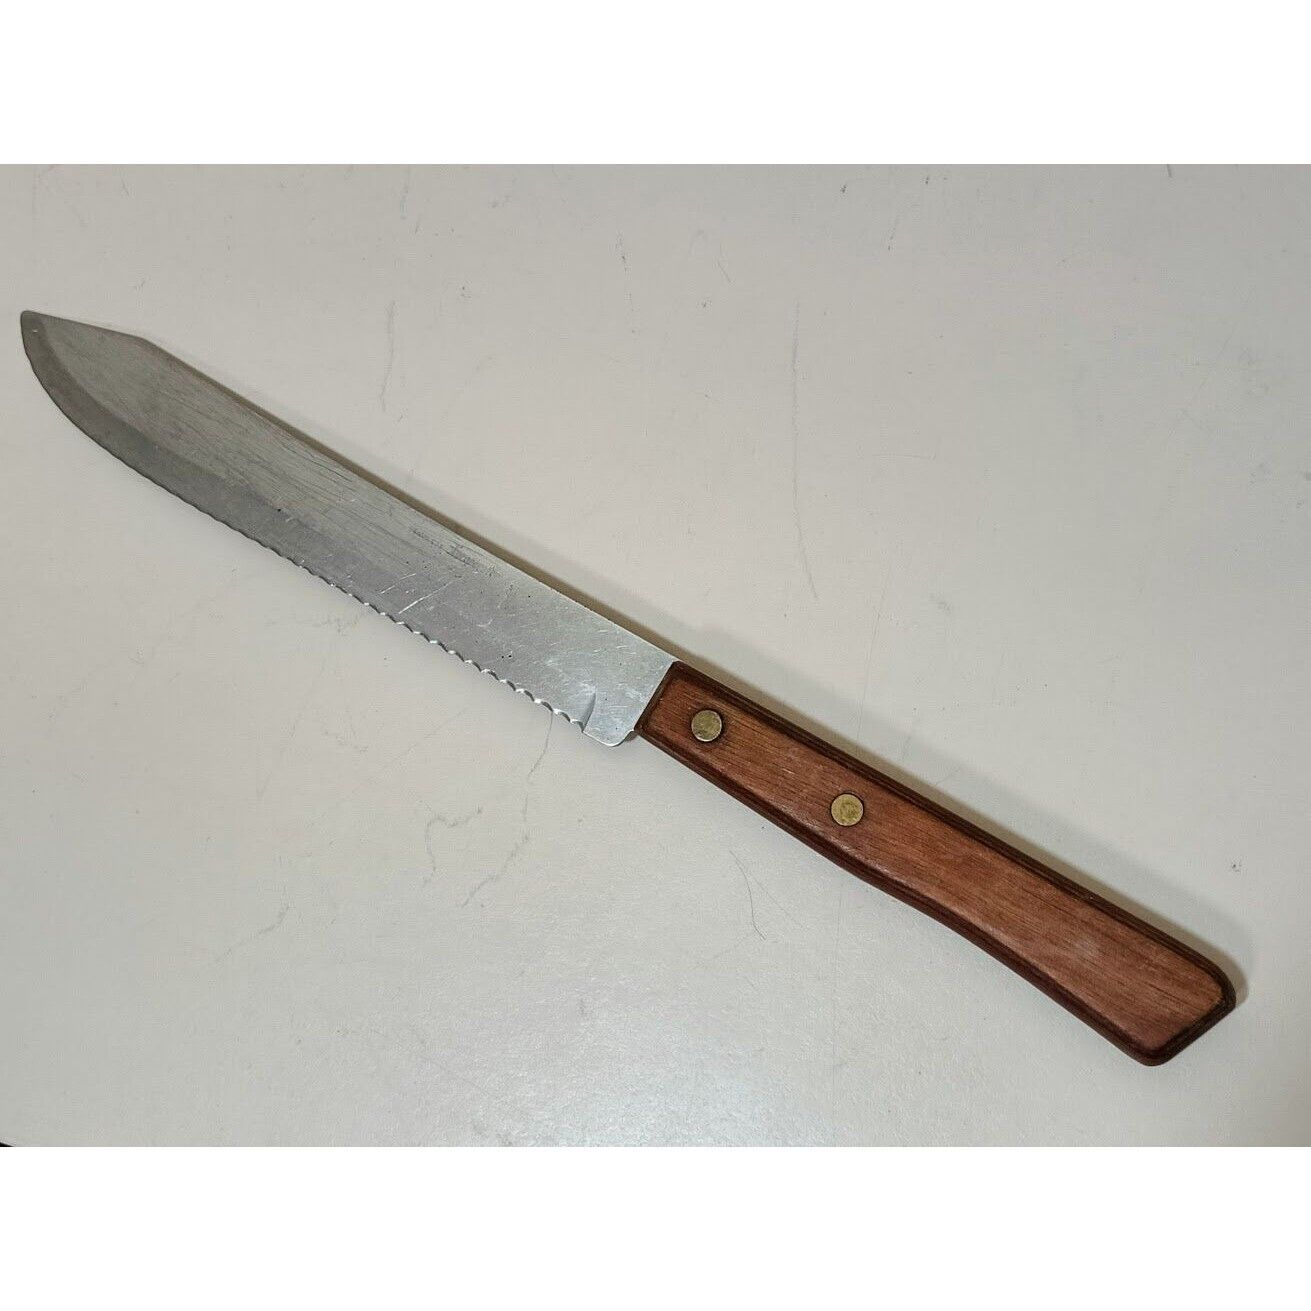 Vintage Forgecraft Stainless Steel Serrated Knife with Wooden Handle - USA Made